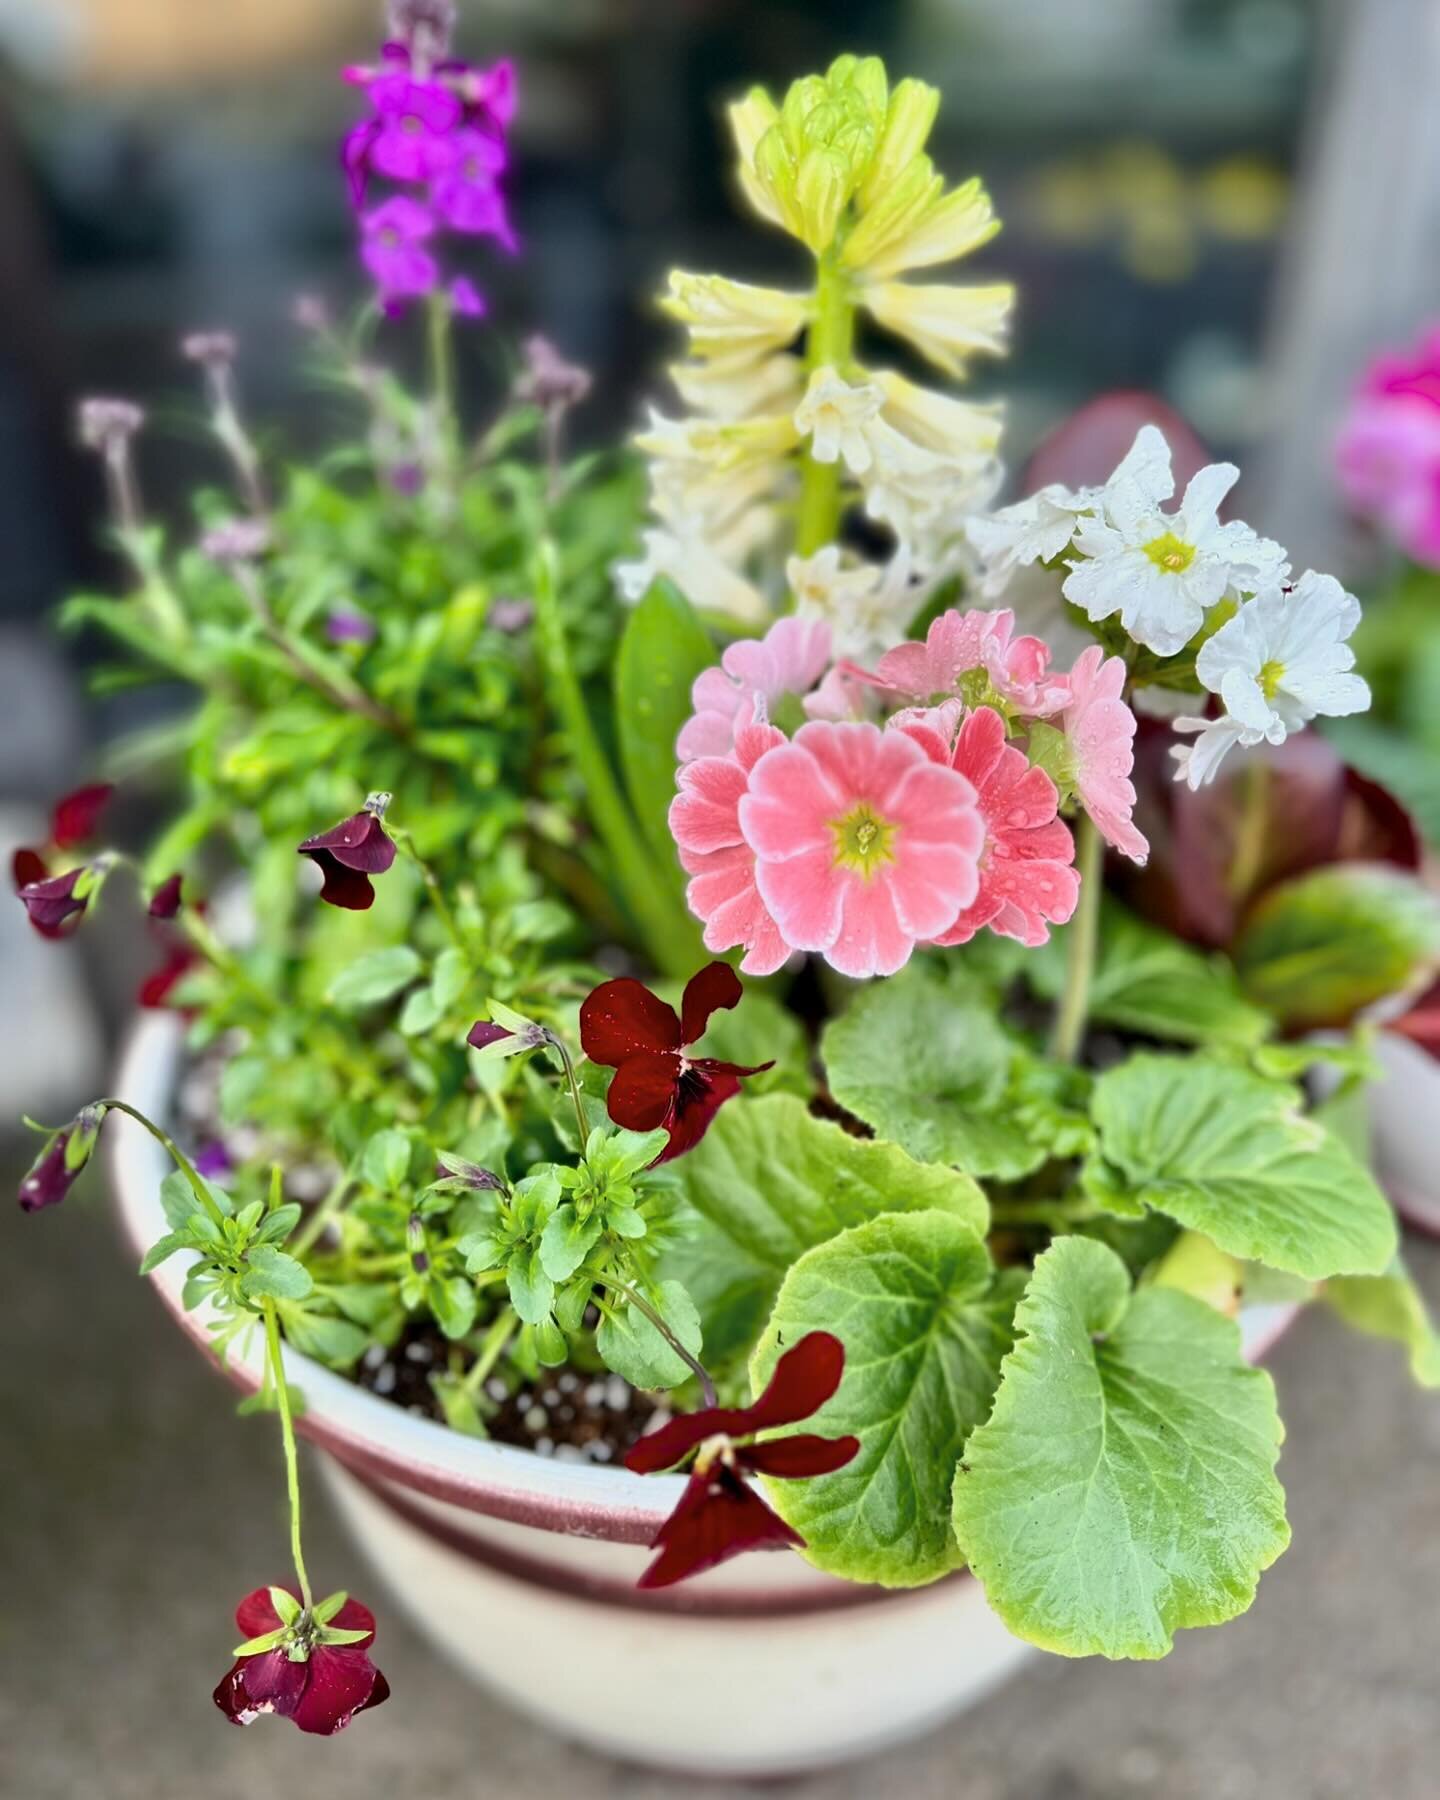 Early spring container inspo 🌷 Stop by our shop in town this weekend for some garden inspiration. Spring will be here before we know it!

#local #pnw #flowers #flowershop #gardenlove #plants #plantsmakepeoplehappy #love #horticulture #beautiful #ins